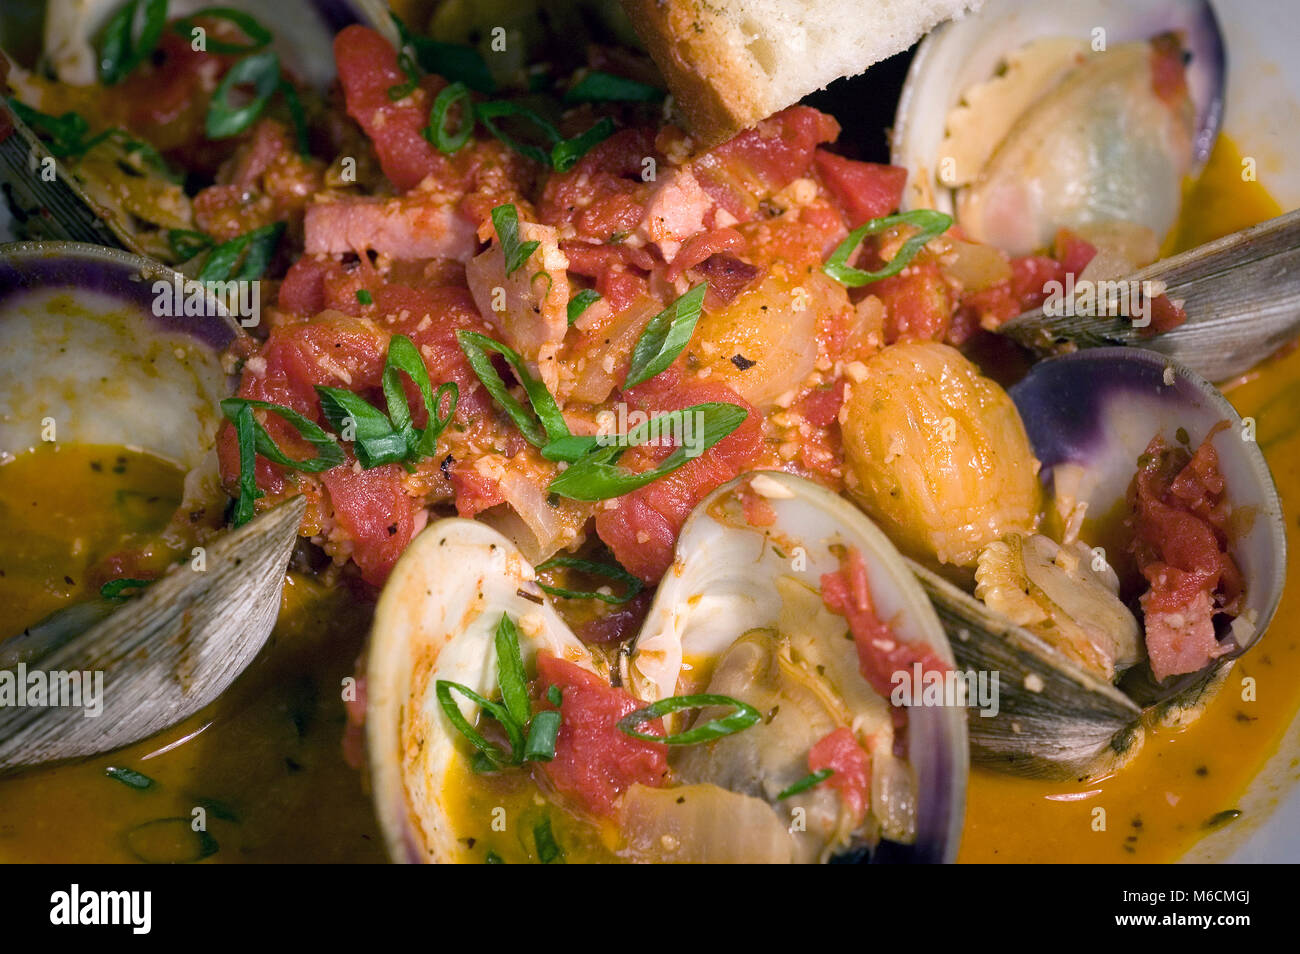 Steamed Little Necks - Served at a Cape Cod restaurant Stock Photo